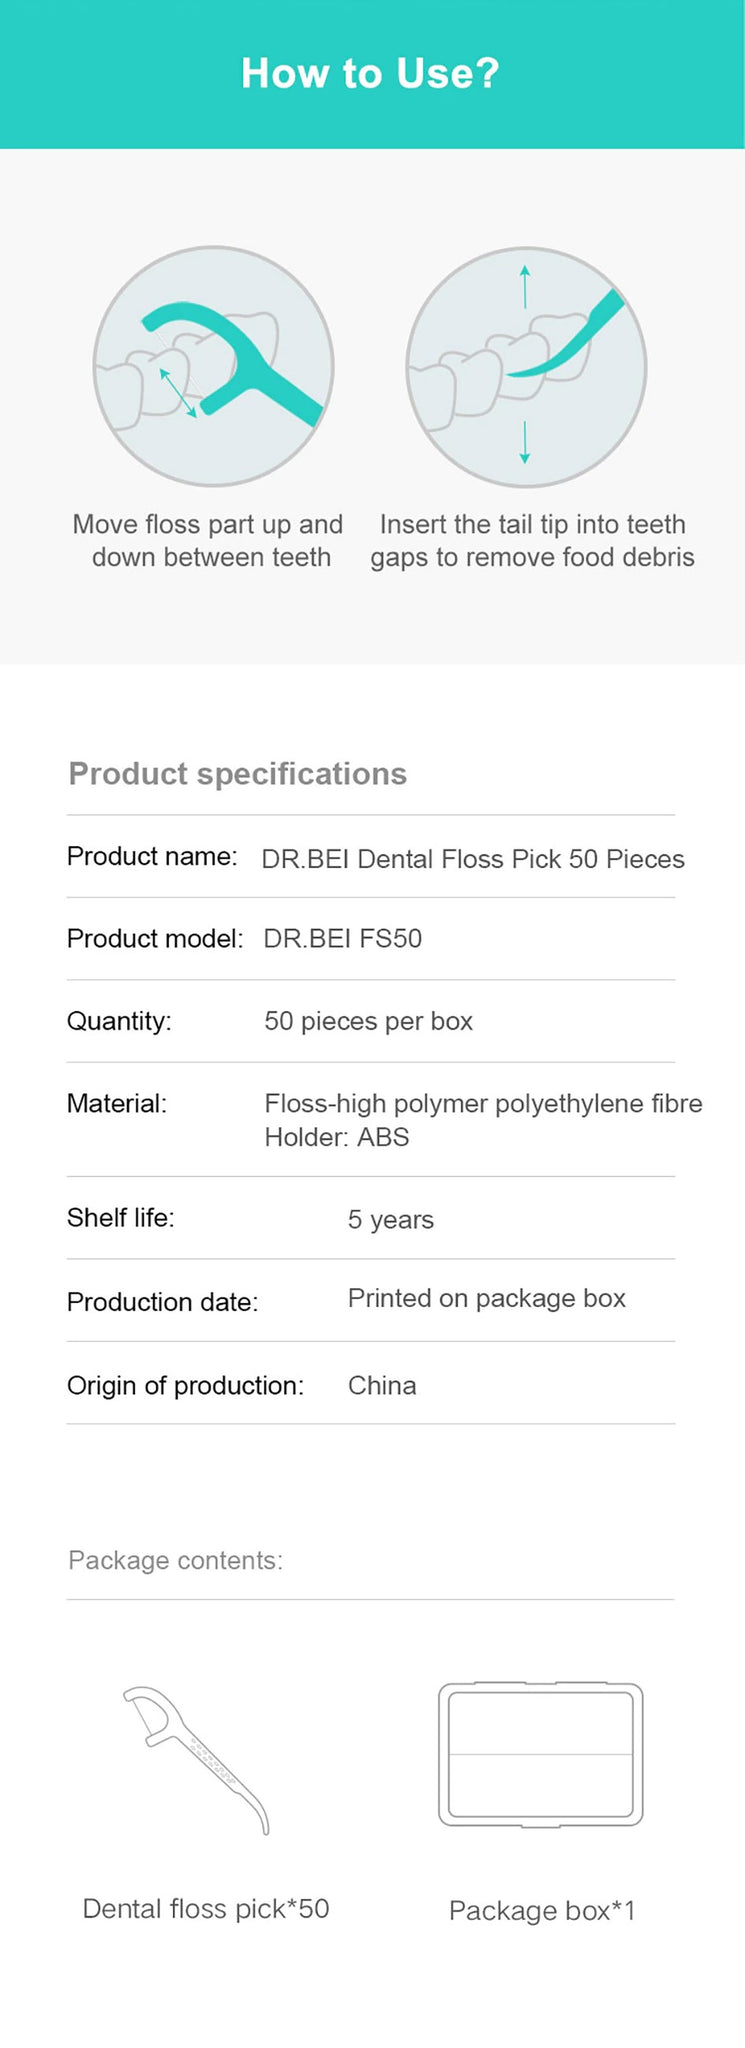 DR.BEI Dental Floss Pick, 50 Pieces Xiaomi Youpin DR.BEI Dental Floss Stick 50pcs/box Portable Picks Teeth Flosser Toothpicks Dental Oral Care Teeth Pick Hygiene Cleaning Tools